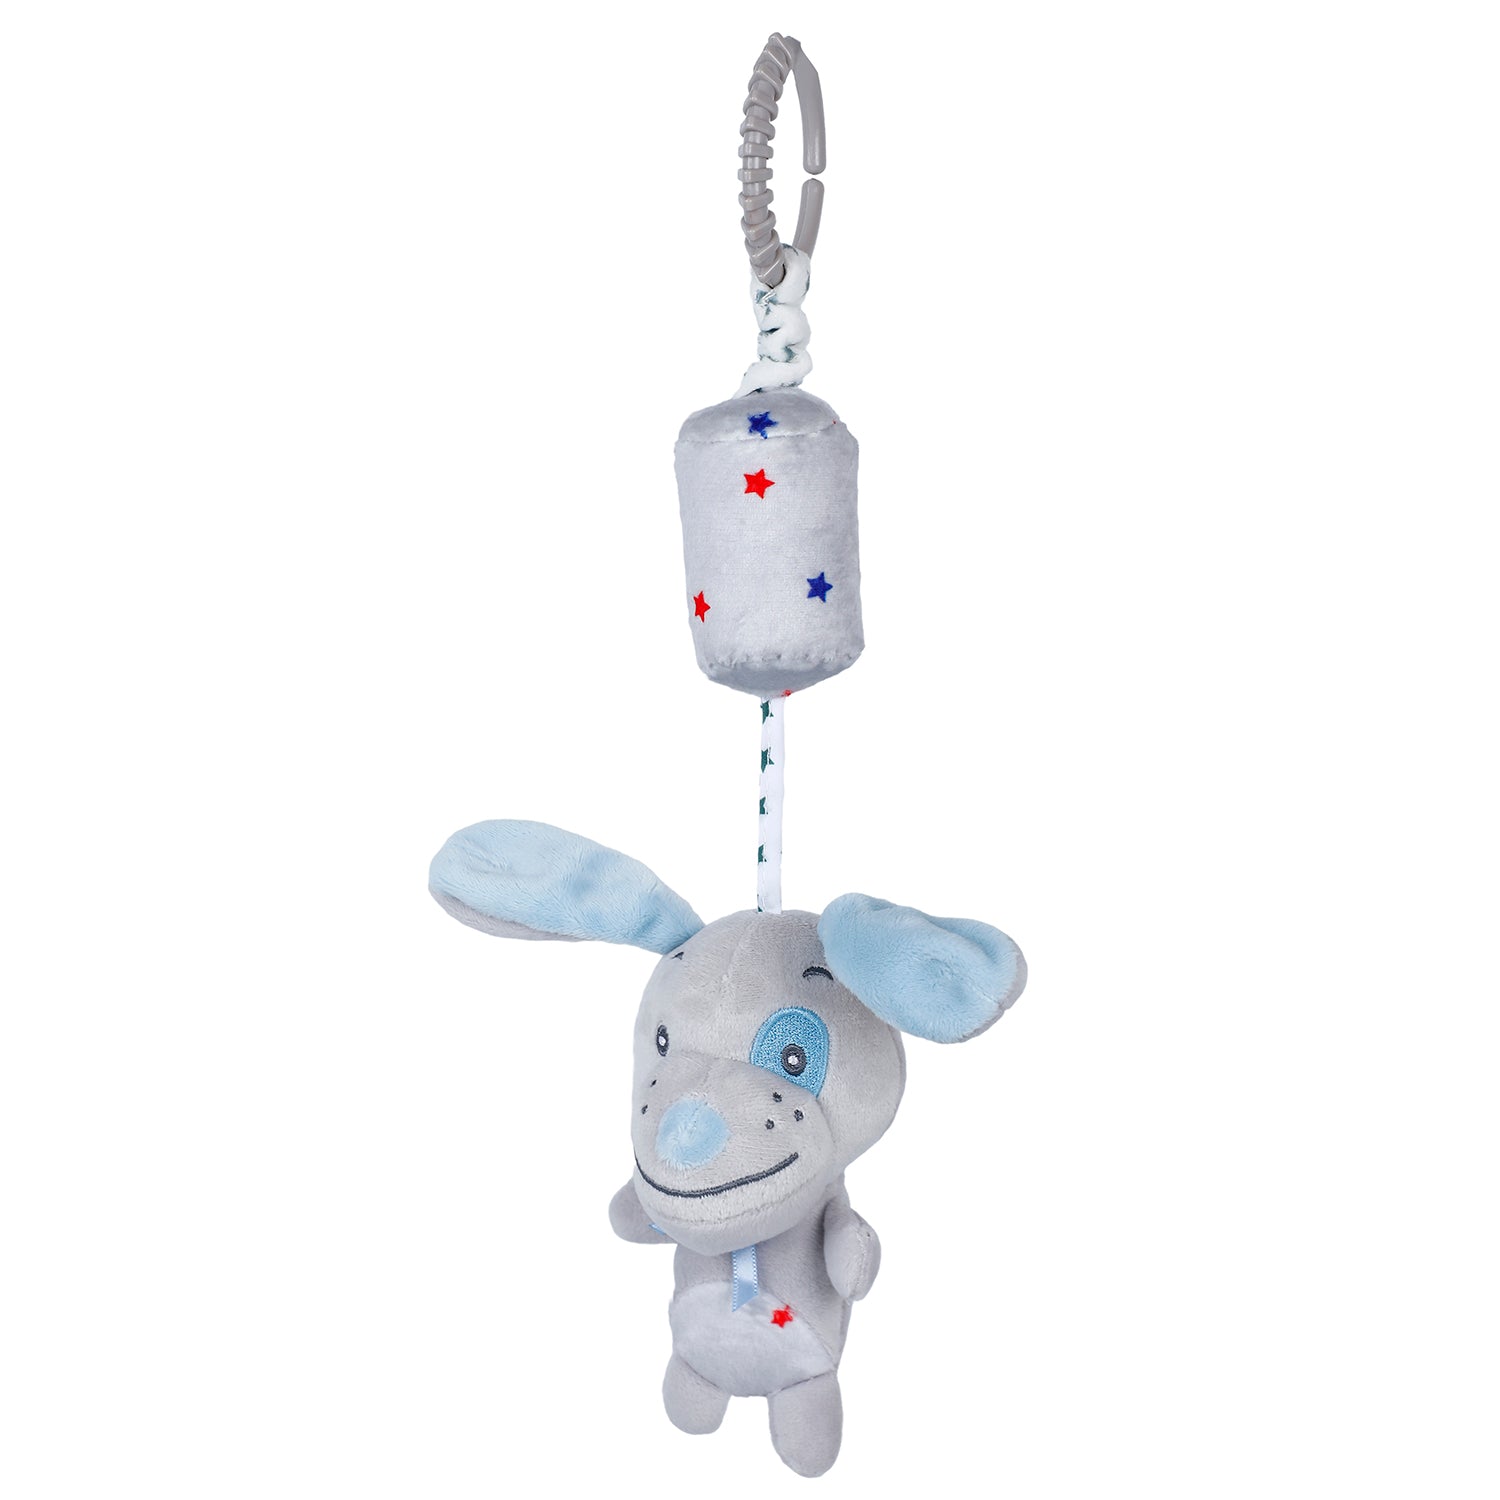 Baby Moo Dog Wind Chime Hanging Musical Toy - Grey